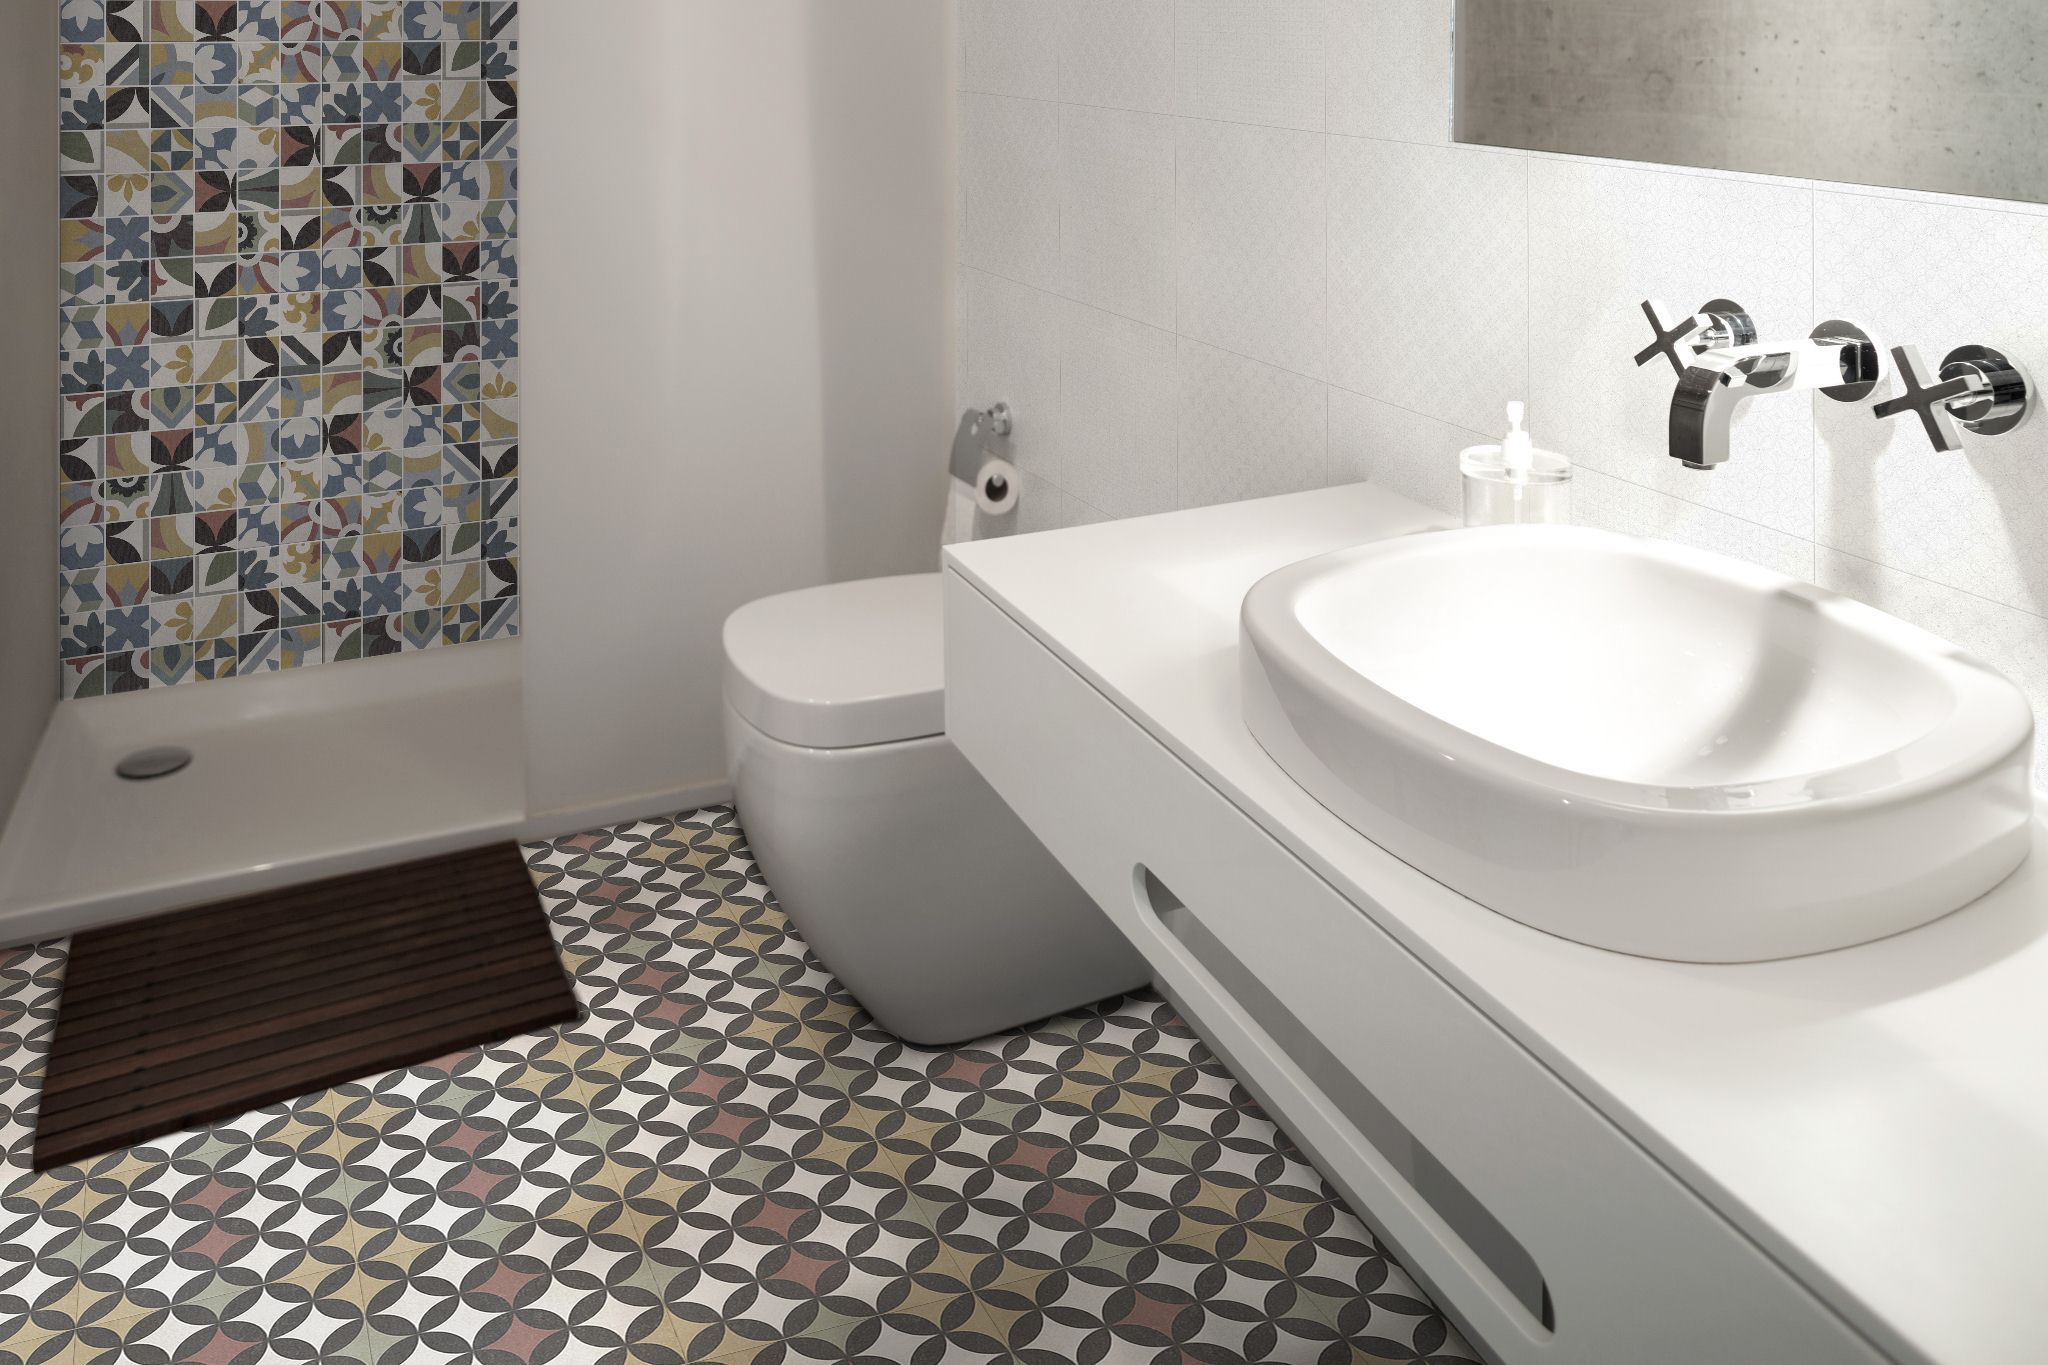 Santiago Patch | Stones & More | Finest selection of Mosaics, Glass, Tile and Stone